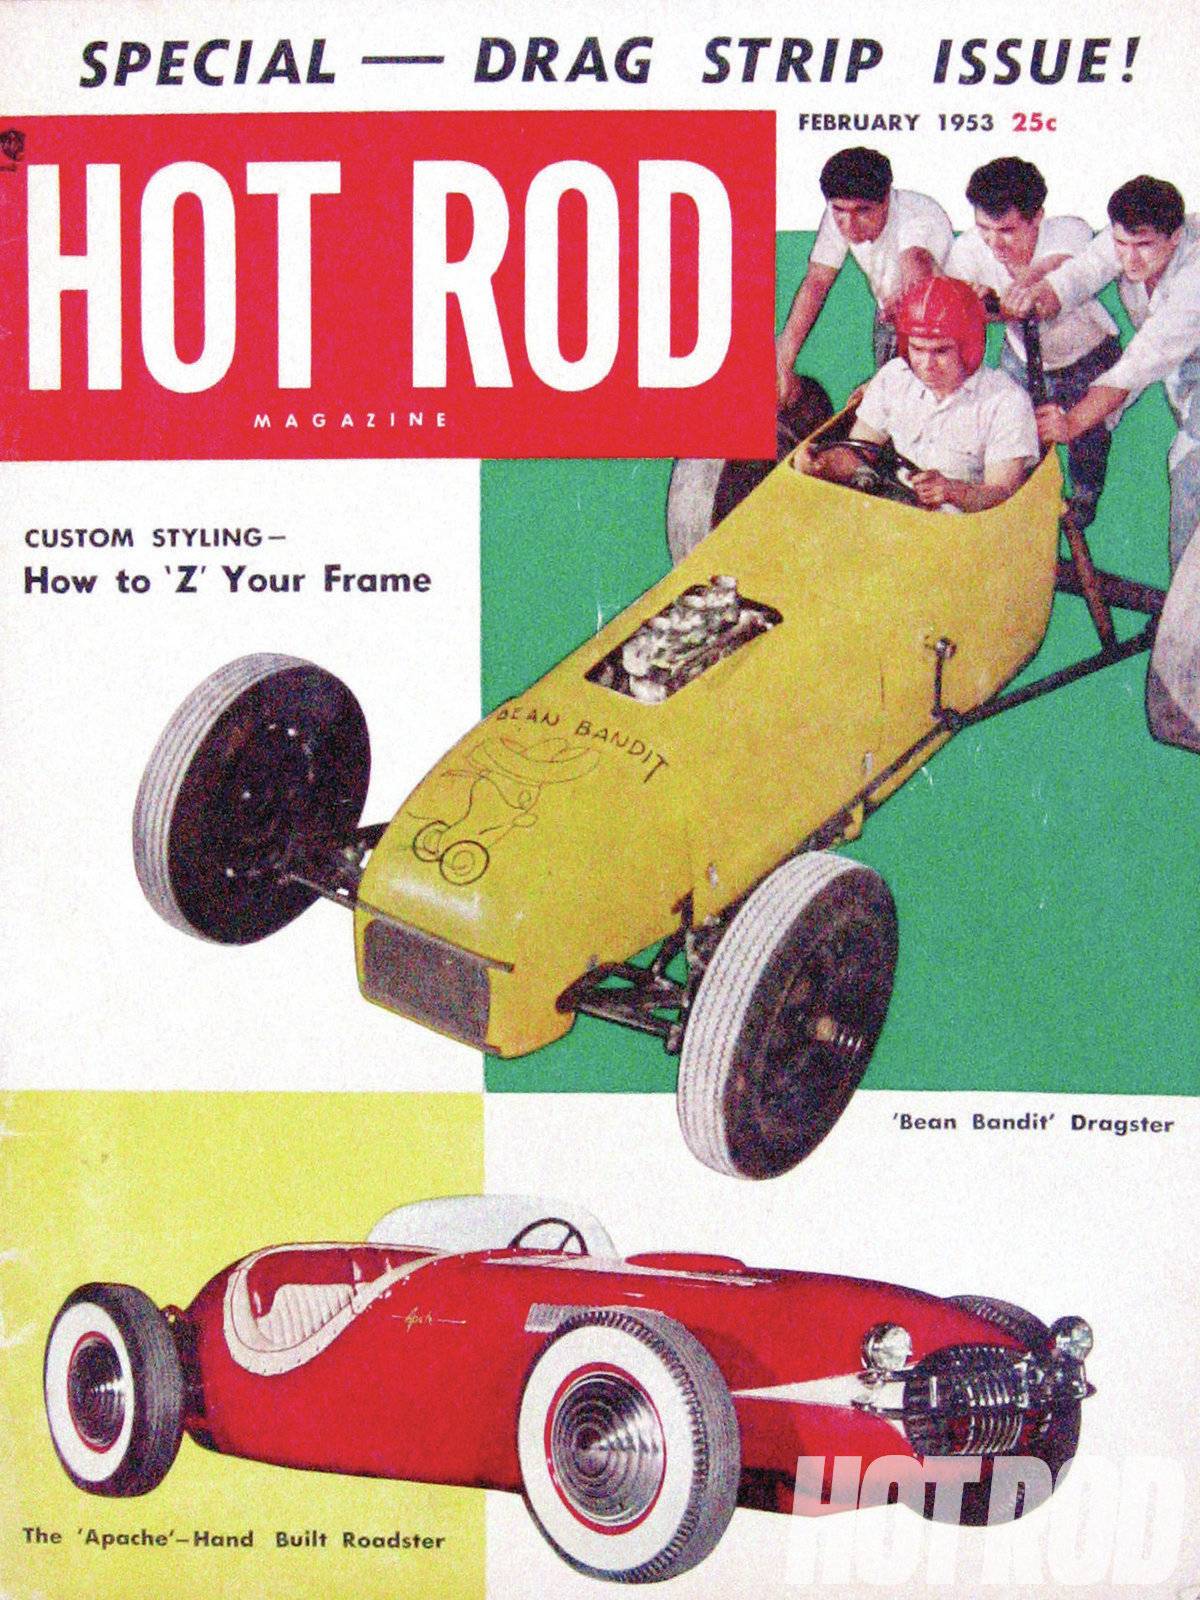 A flyer with a vintage vehicle information